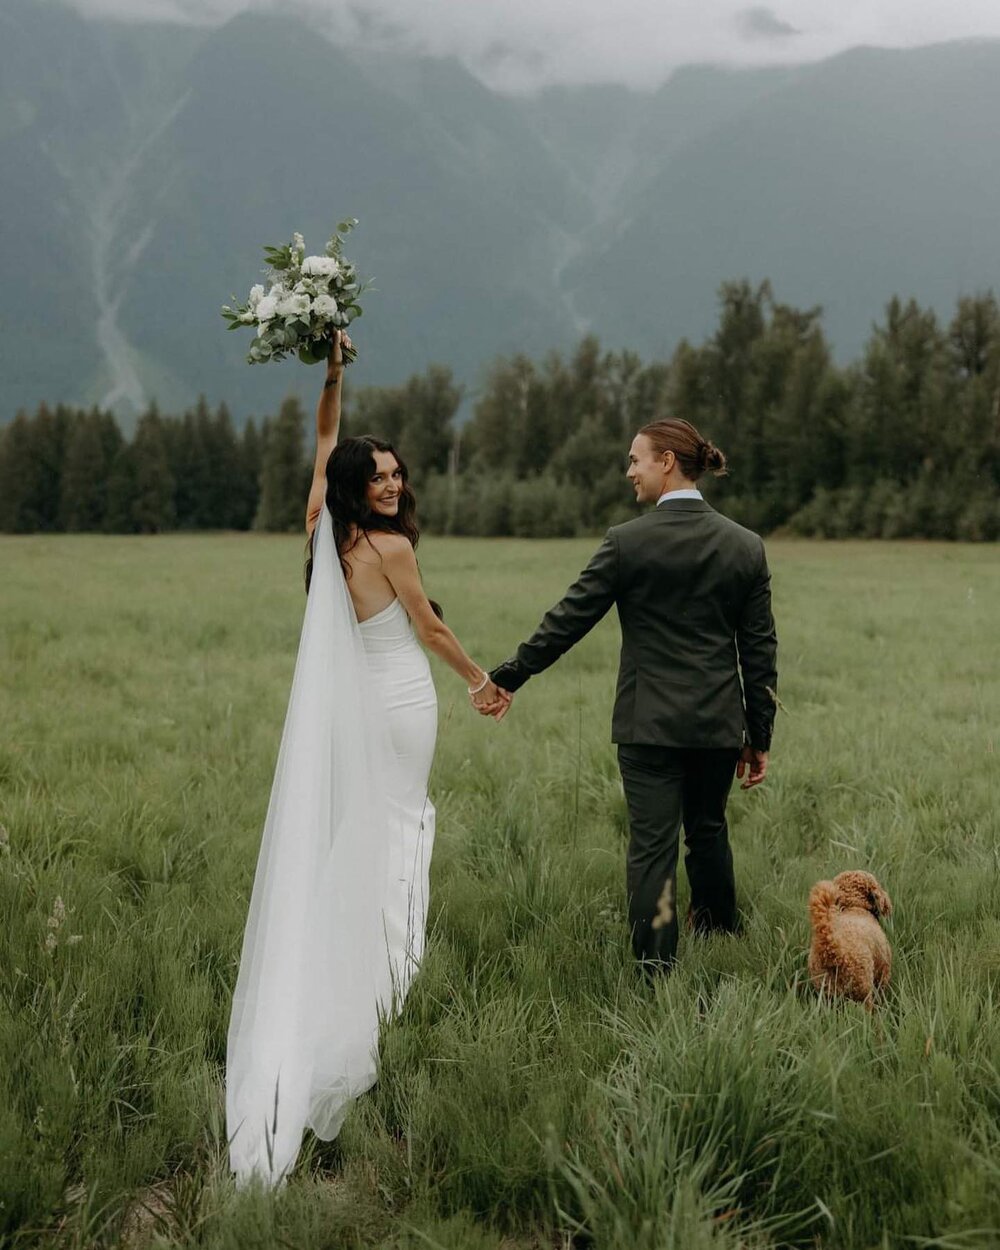 Part 2 of Jaden &amp; Jordan because I wanted to show off A. how cute their dog is and B. how a rainy day can be just as gorgeous 😍
Florals: @senka_florist 
Hair &amp; Makeup: @dollymakeup.ca 
Private Chef: @homebistronomy 
Cabin Venue: @joffrecreek